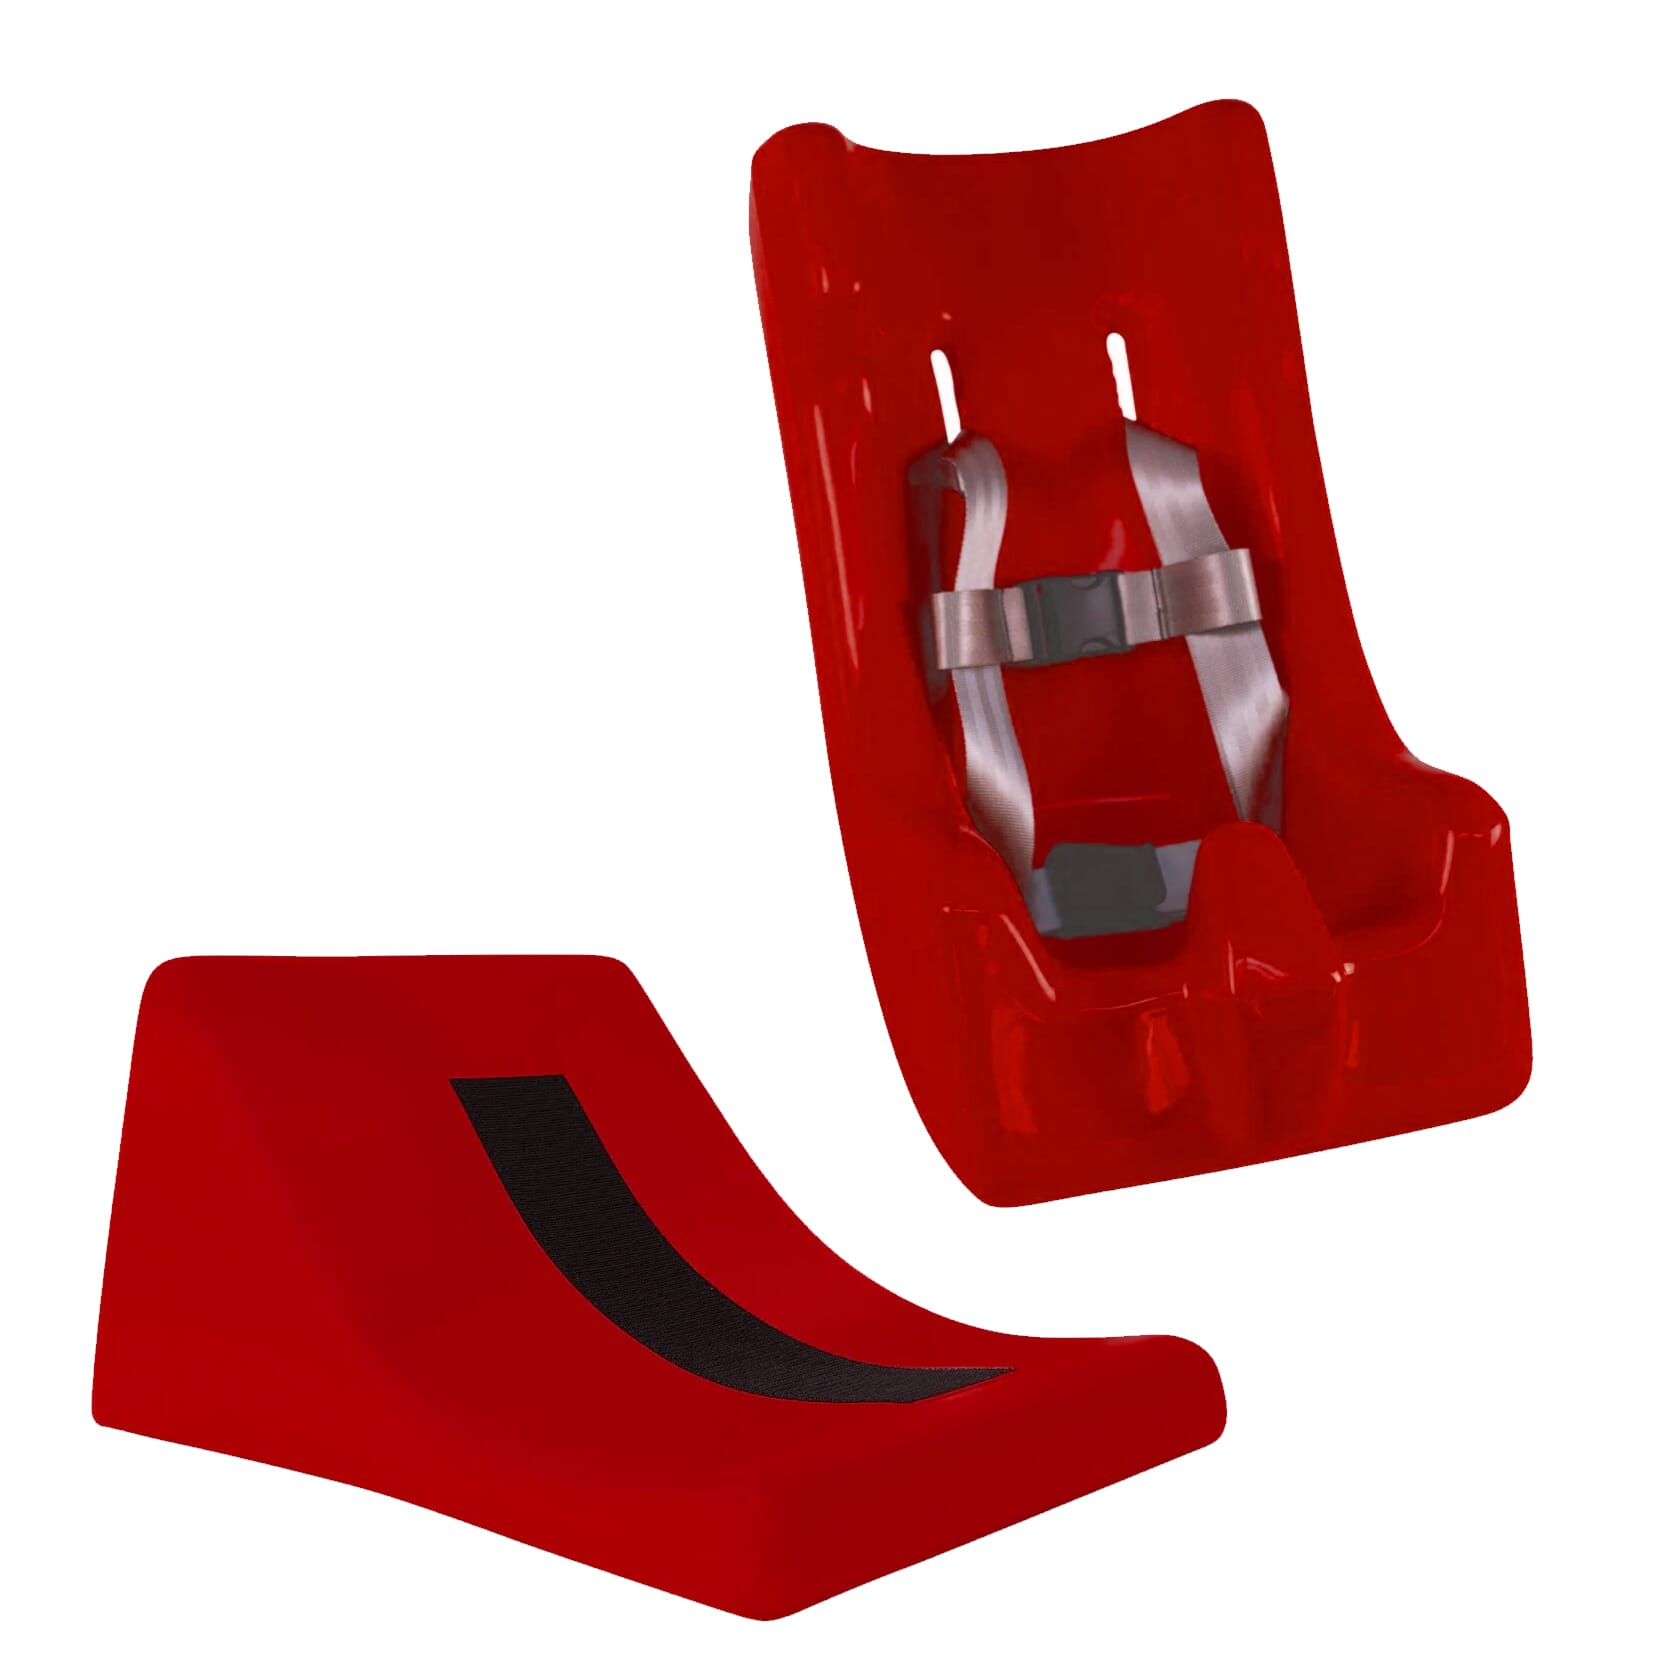 View Tumble Forms Deluxe Floor Sitter Set Small Red information